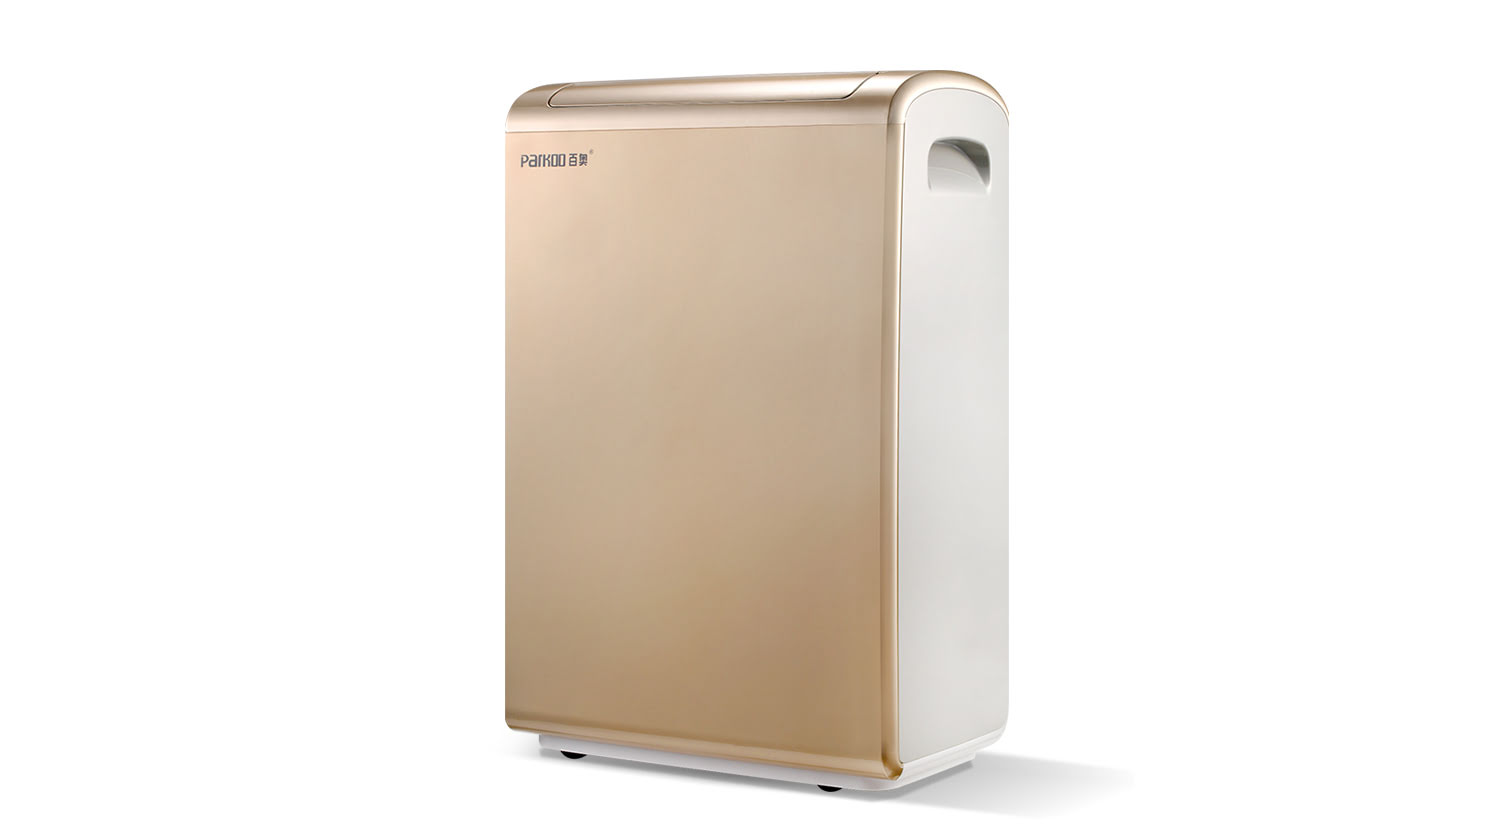 Which dehumidifier is better for home use- Intelligent touch household dehumidifier